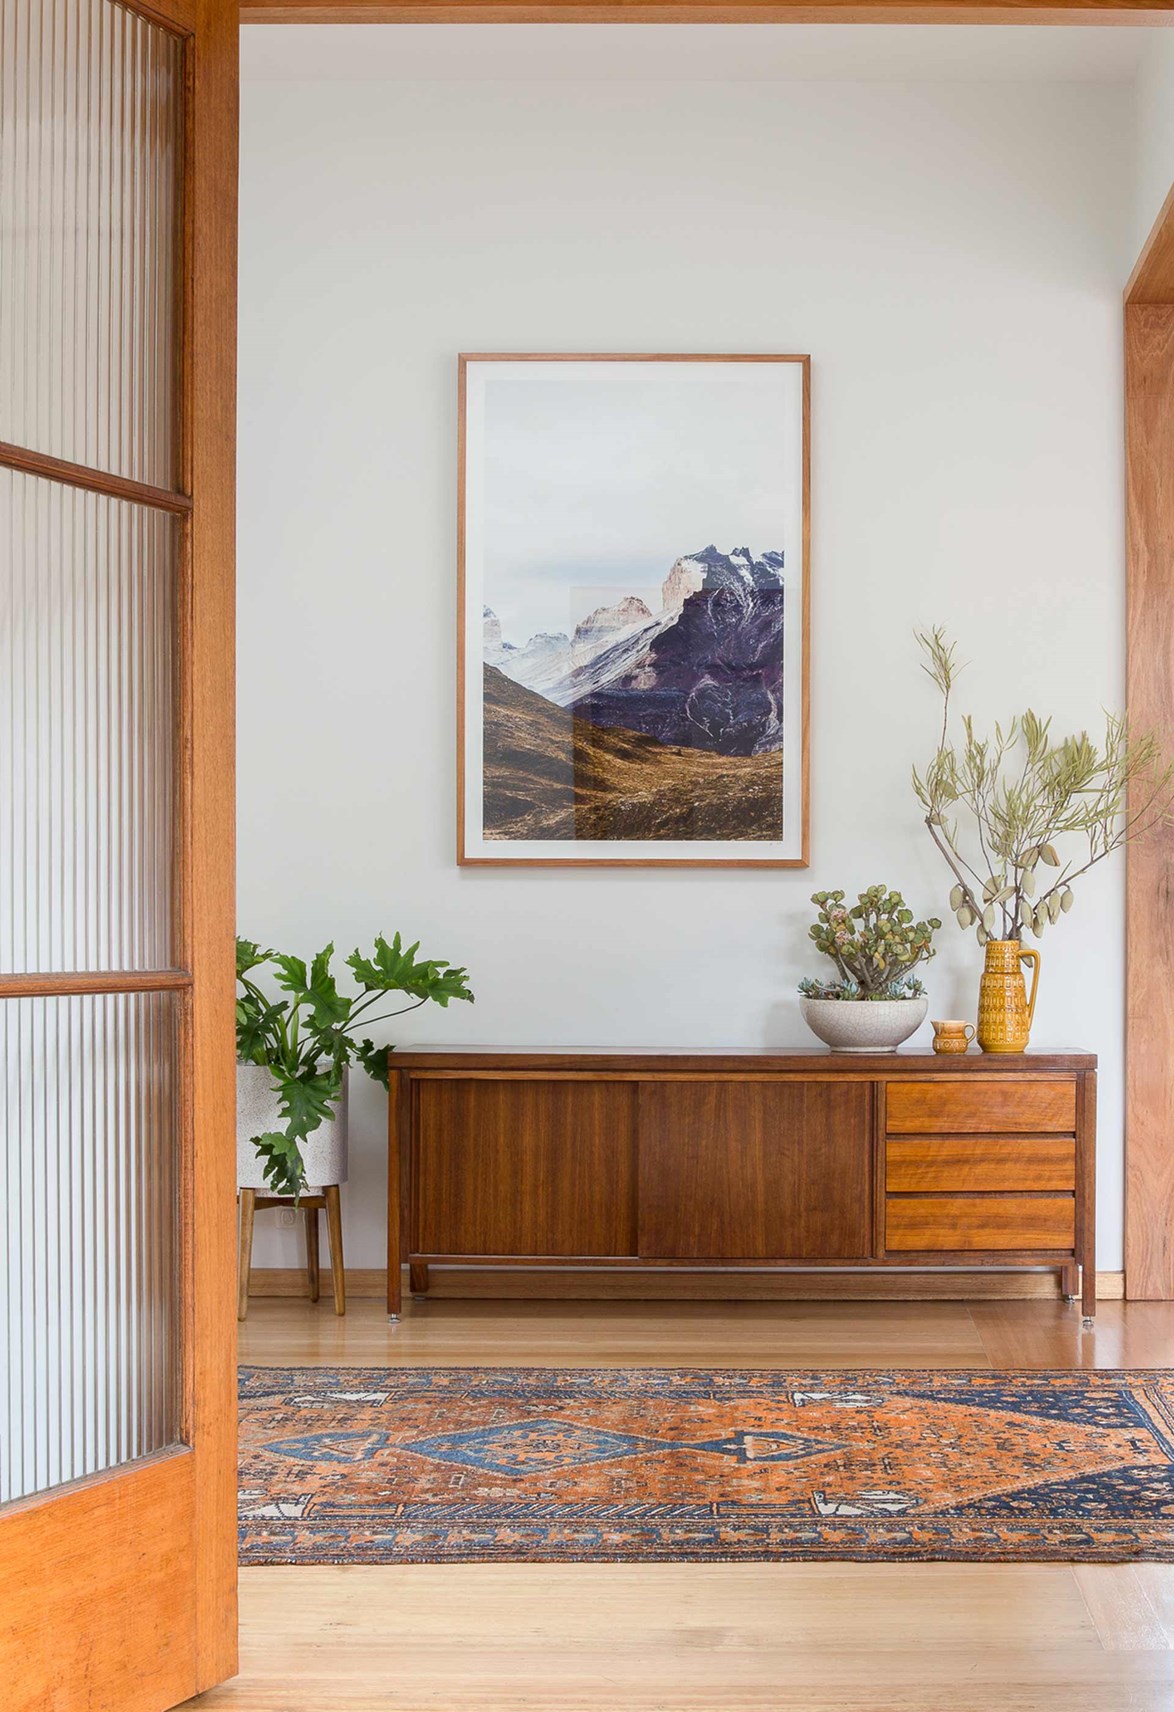 Lovers of mid-century modern design will be glad to know  that fluted glass works here too. For an easy way to incorporate the  trend in your home without knocking down walls, try installing a pair of fluted glass doors. Take cues from this [eco-friendly Californian bungalow](https://www.homestolove.com.au/eco-friendly-melbourne-bungalow-17260|target="_blank").